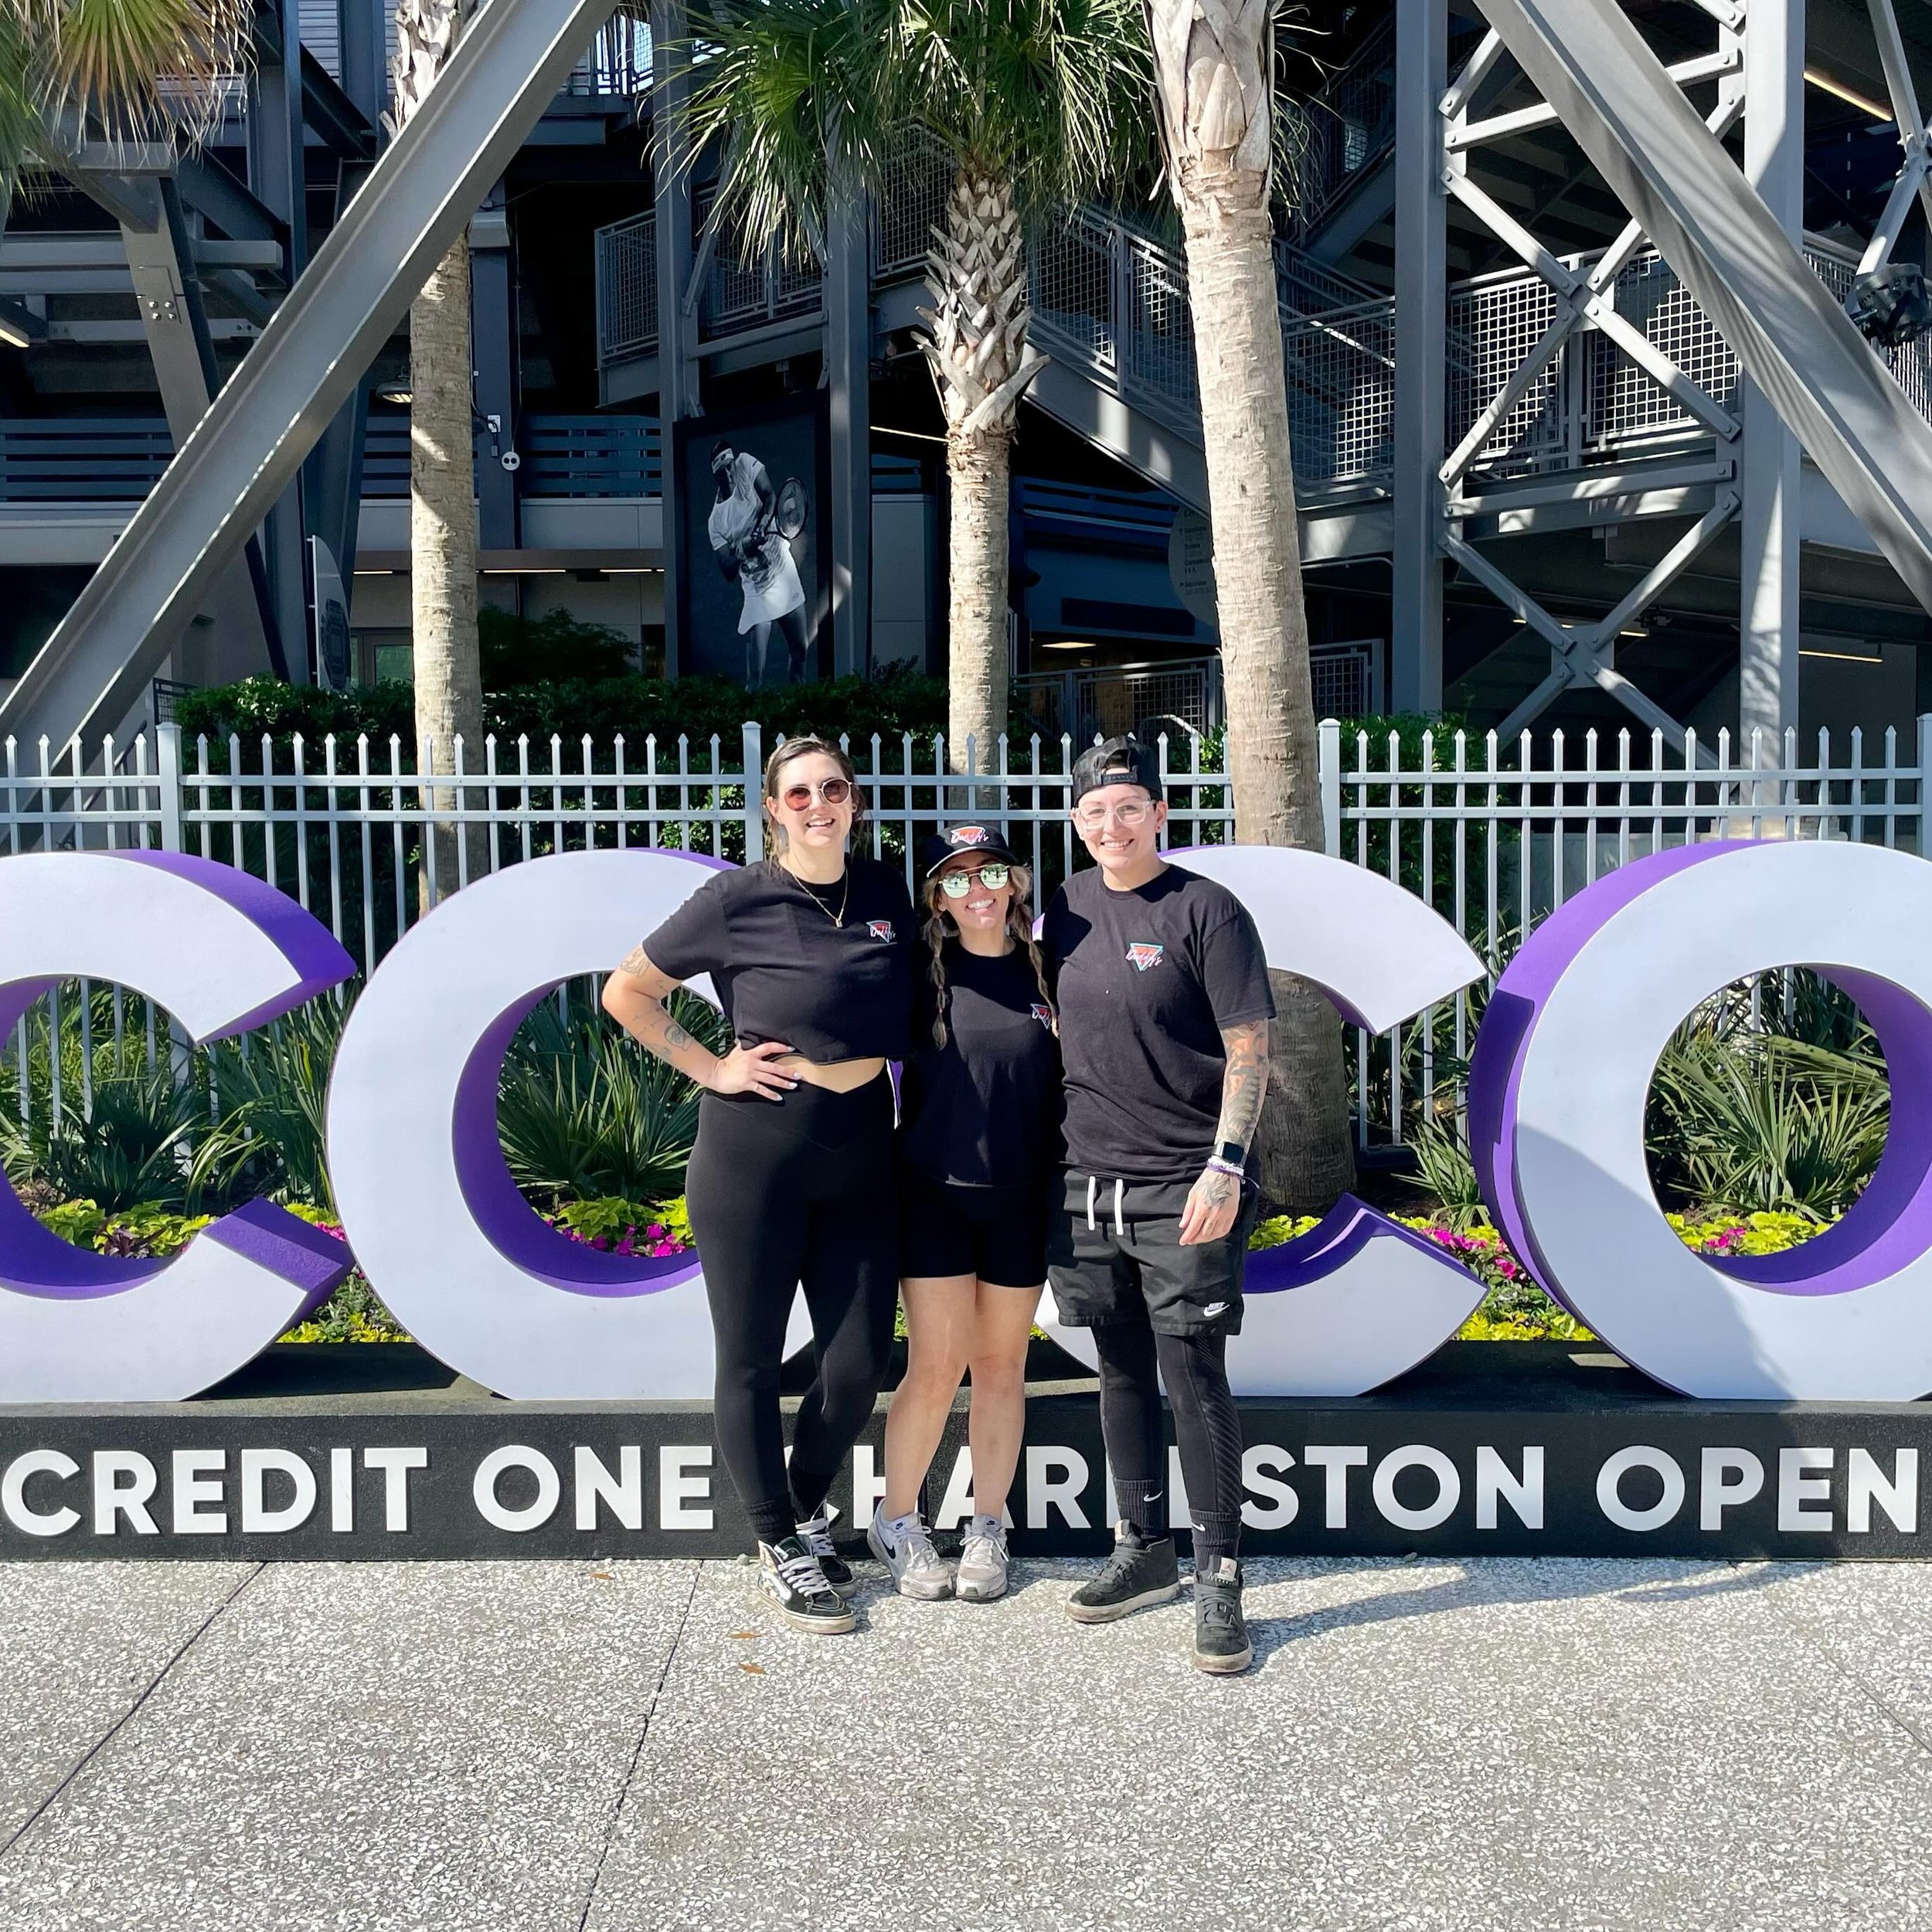 Your favorite Daddies have been hard at work slinging lattes and burritos at the @creditonecharlestonopen. We&rsquo;re almost fully recovered and ready to get back to making our rounds! Can&rsquo;t wait to see yall! 💜 Stay tuned for our schedule!